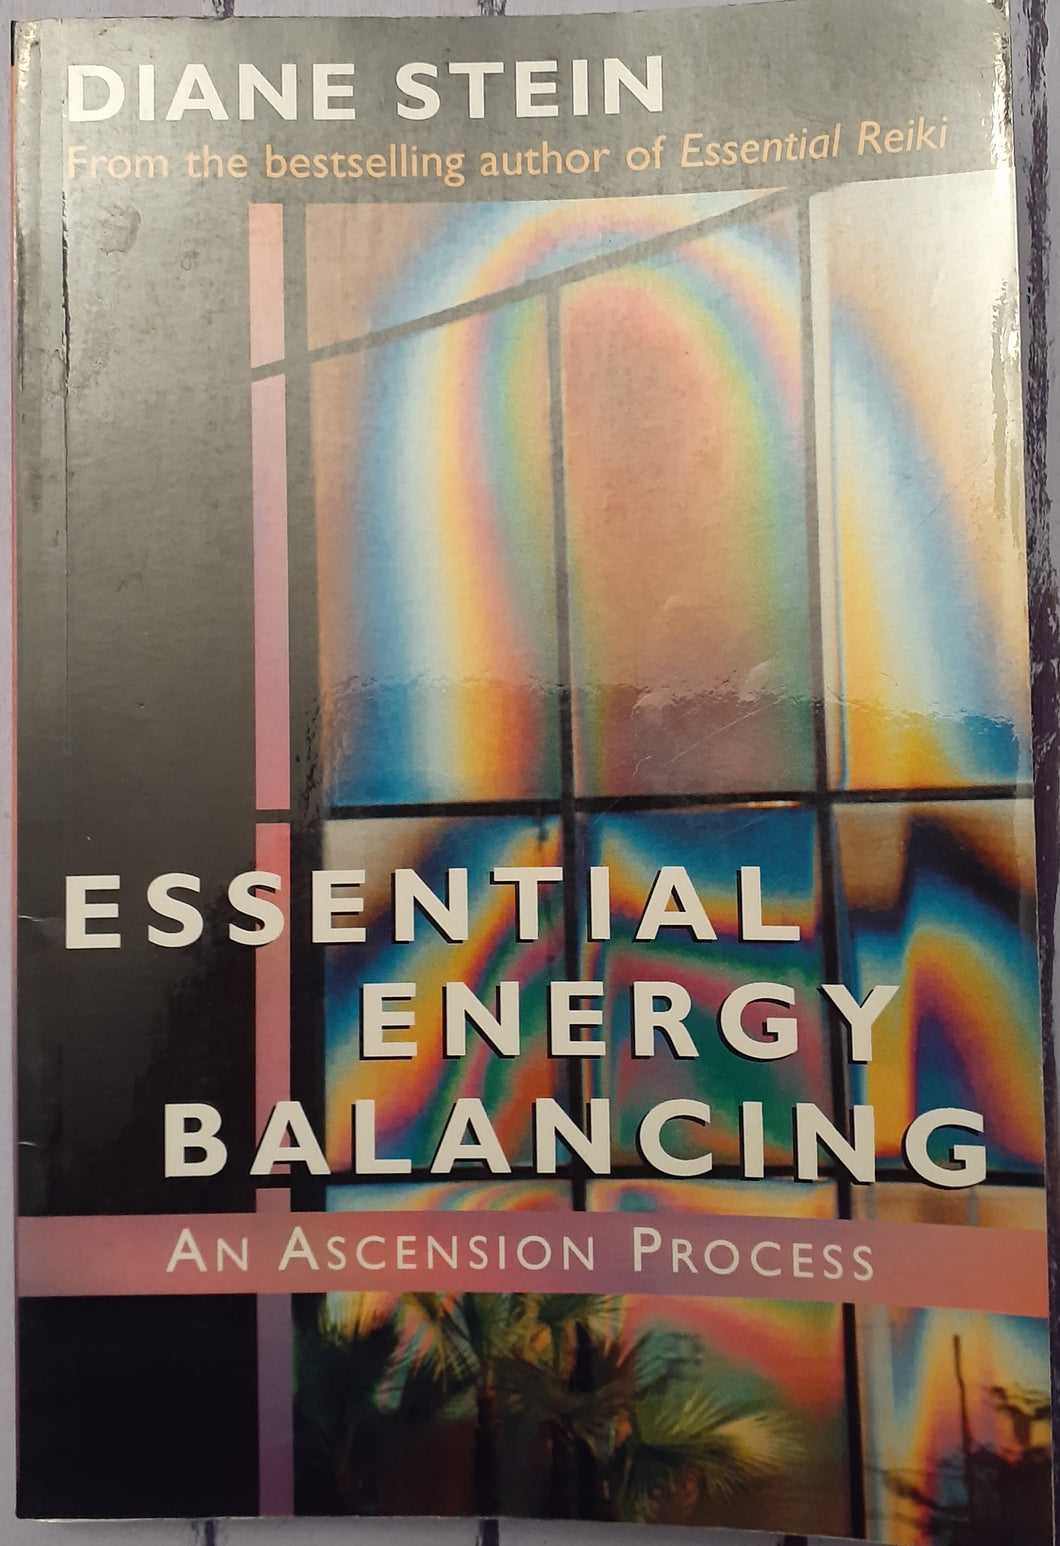 Essential Energy Balancing - An Ascension Process